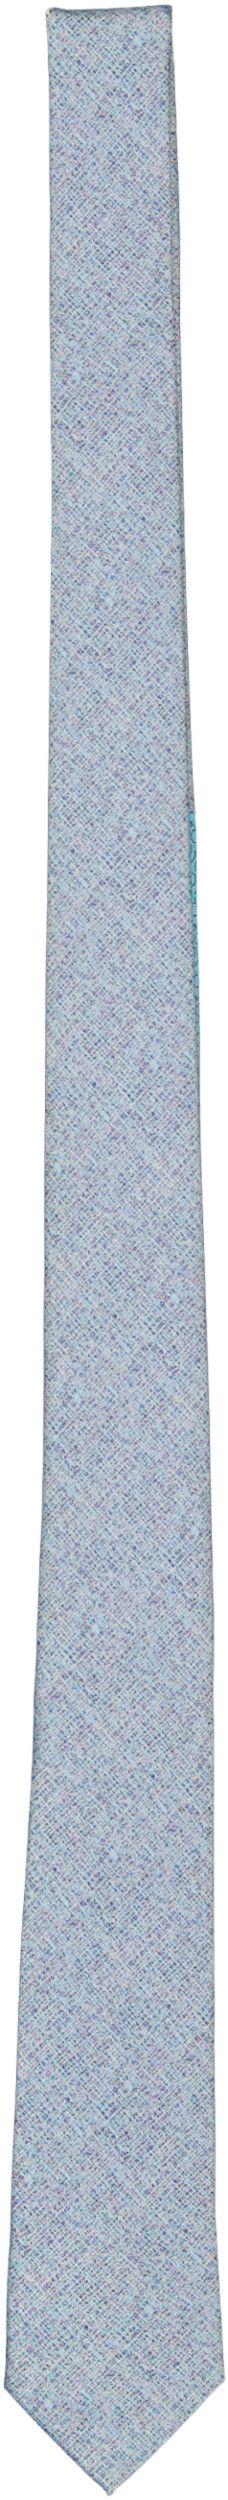 T.O. Collection Mens Necktie - TO228